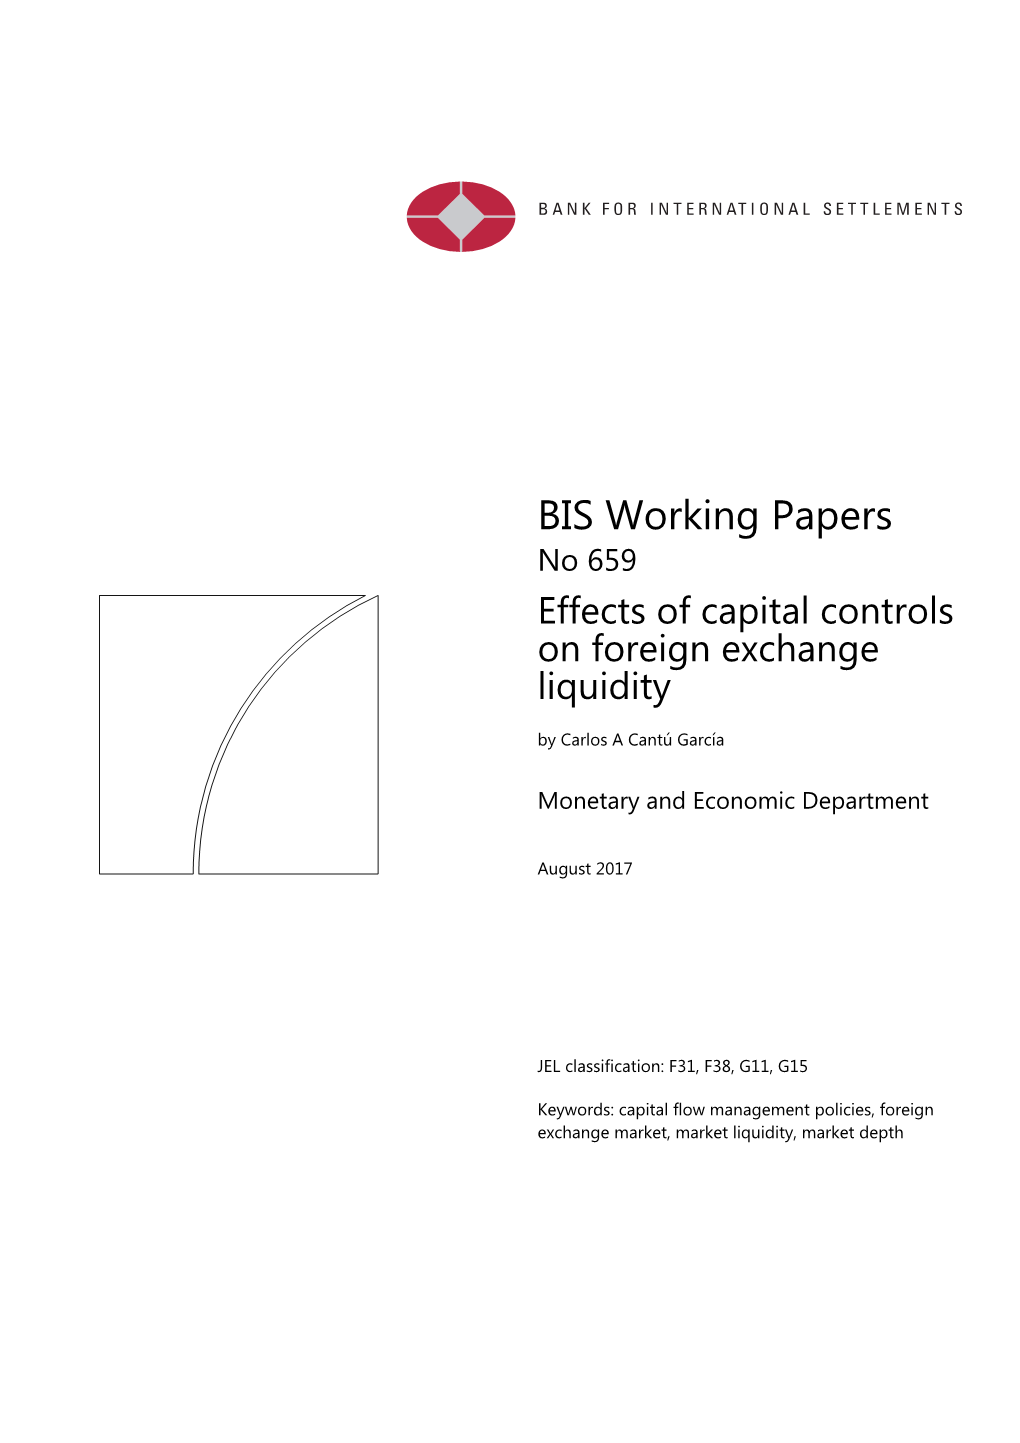 Effects of Capital Controls on Foreign Exchange Liquidity